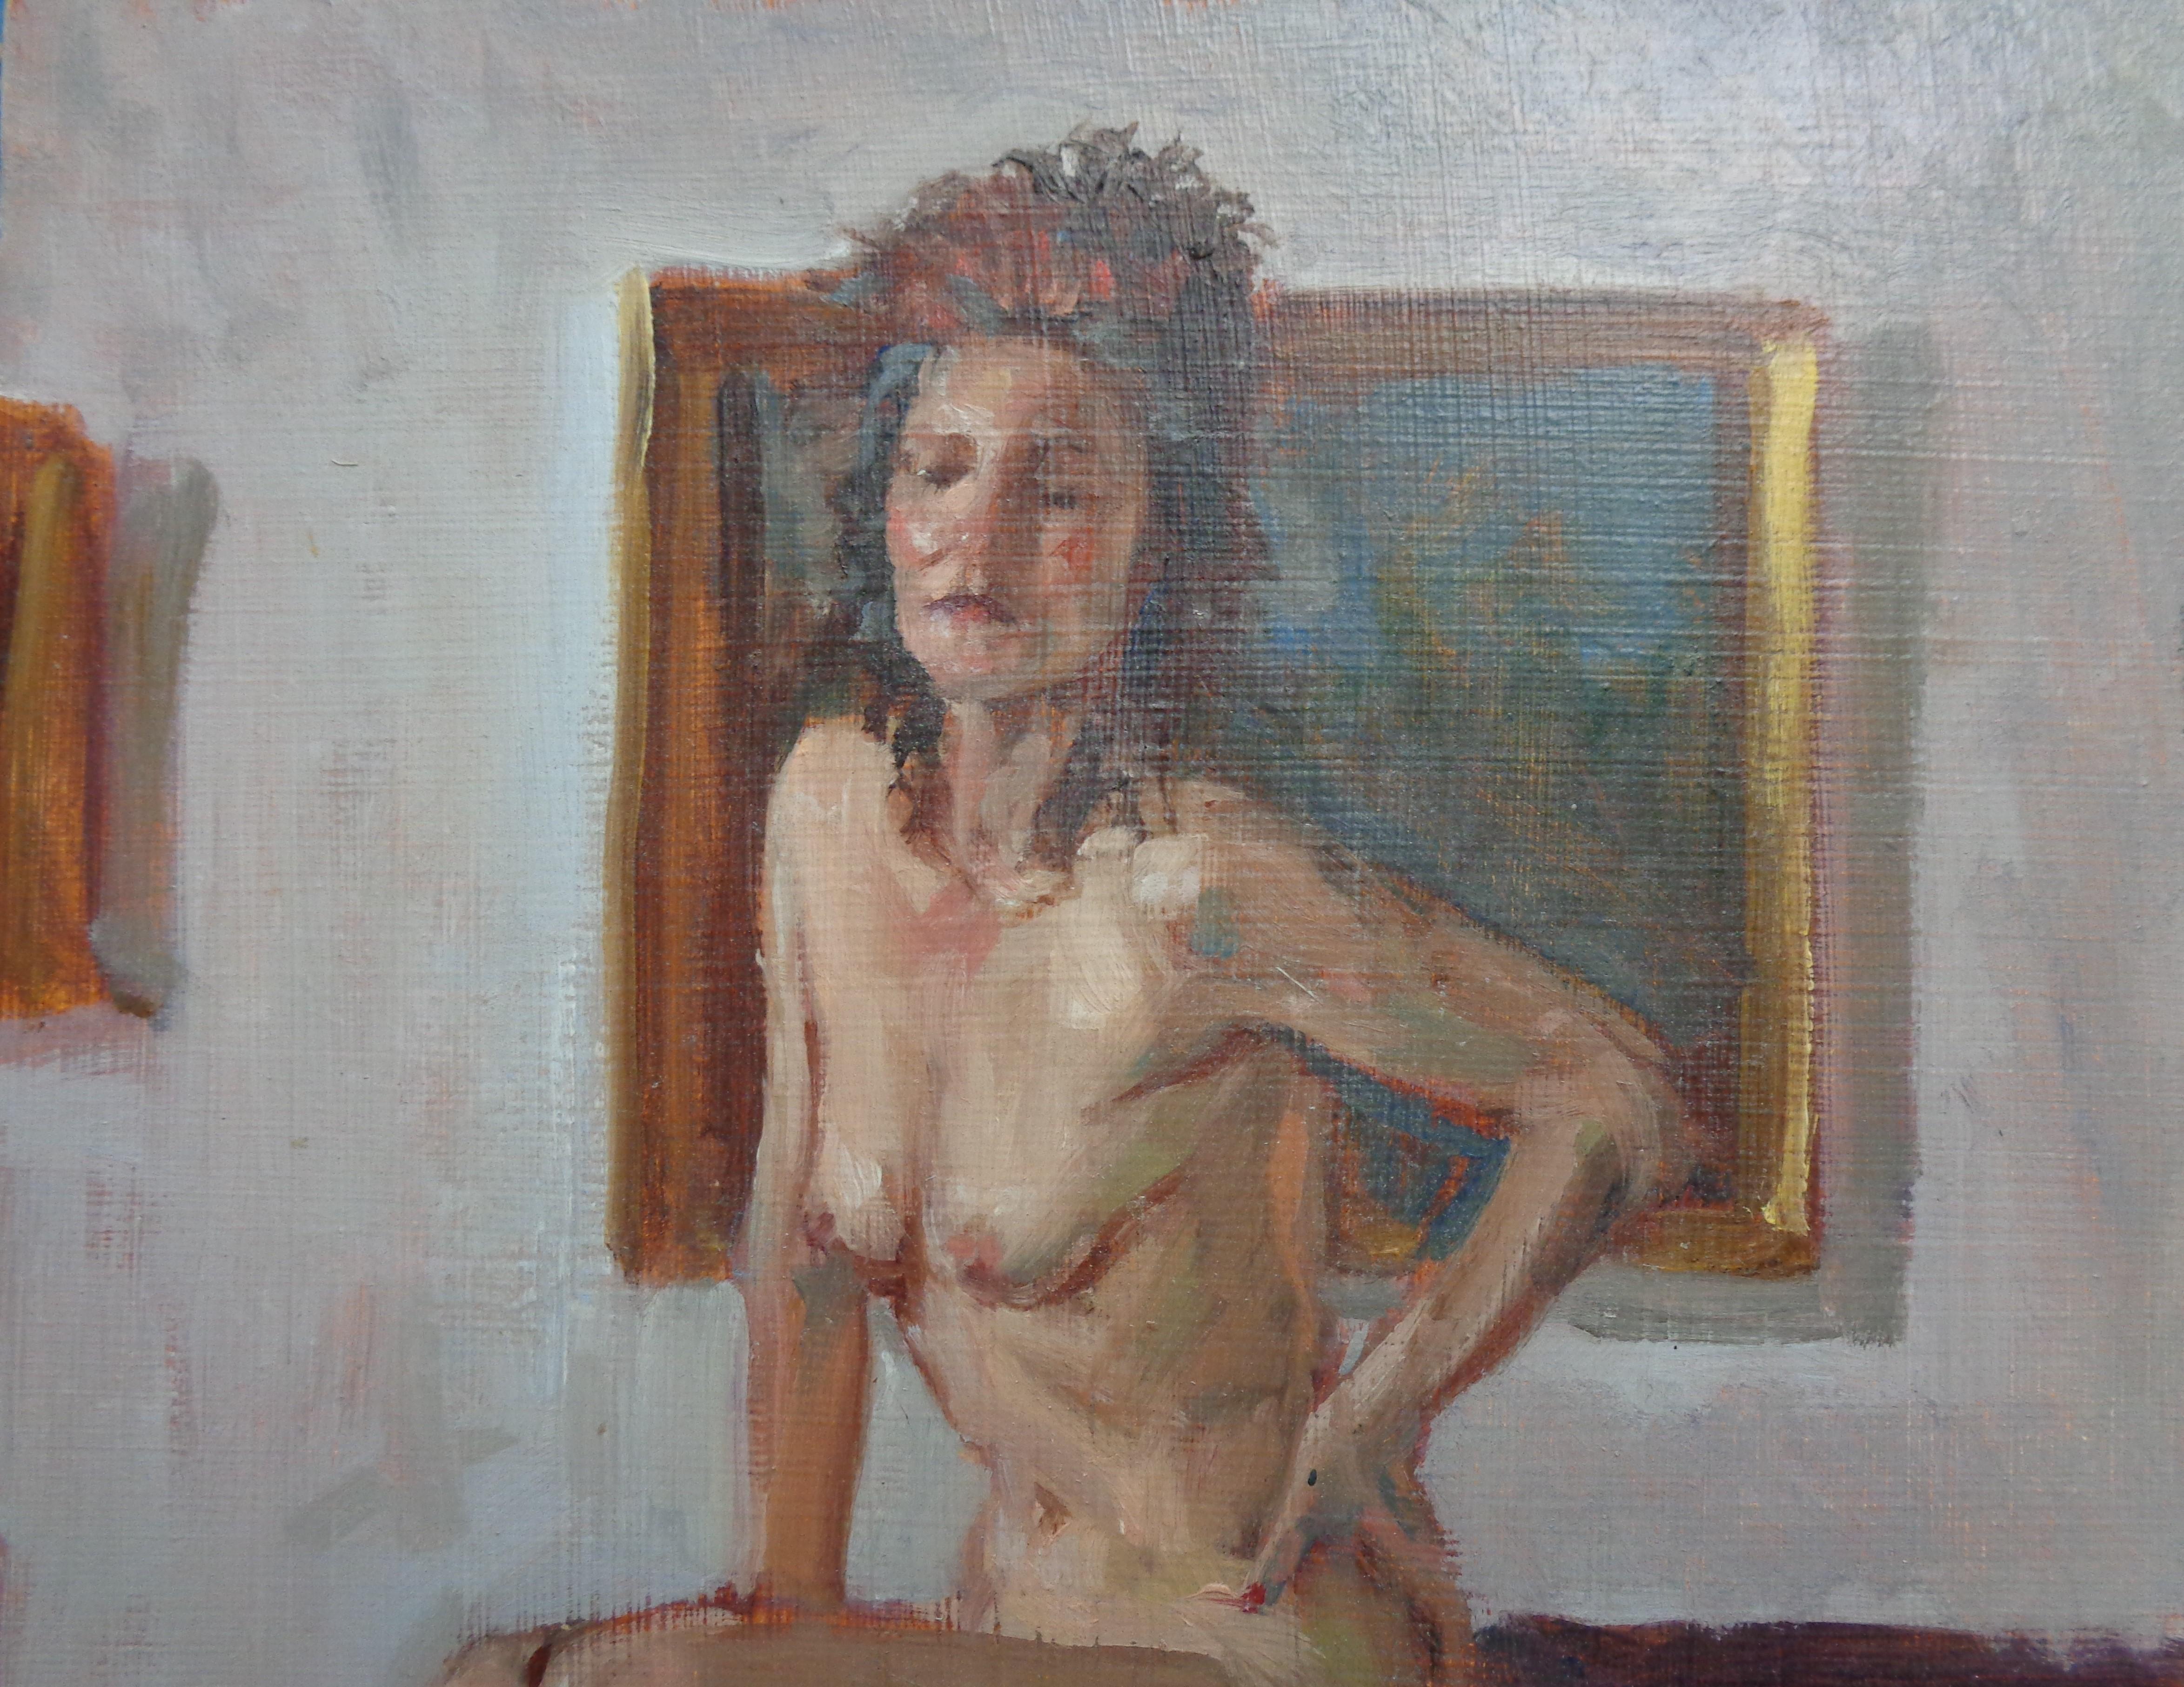   Contemporary Traditional Female Figure Painting by Robert Beck Lambertville NJ For Sale 1